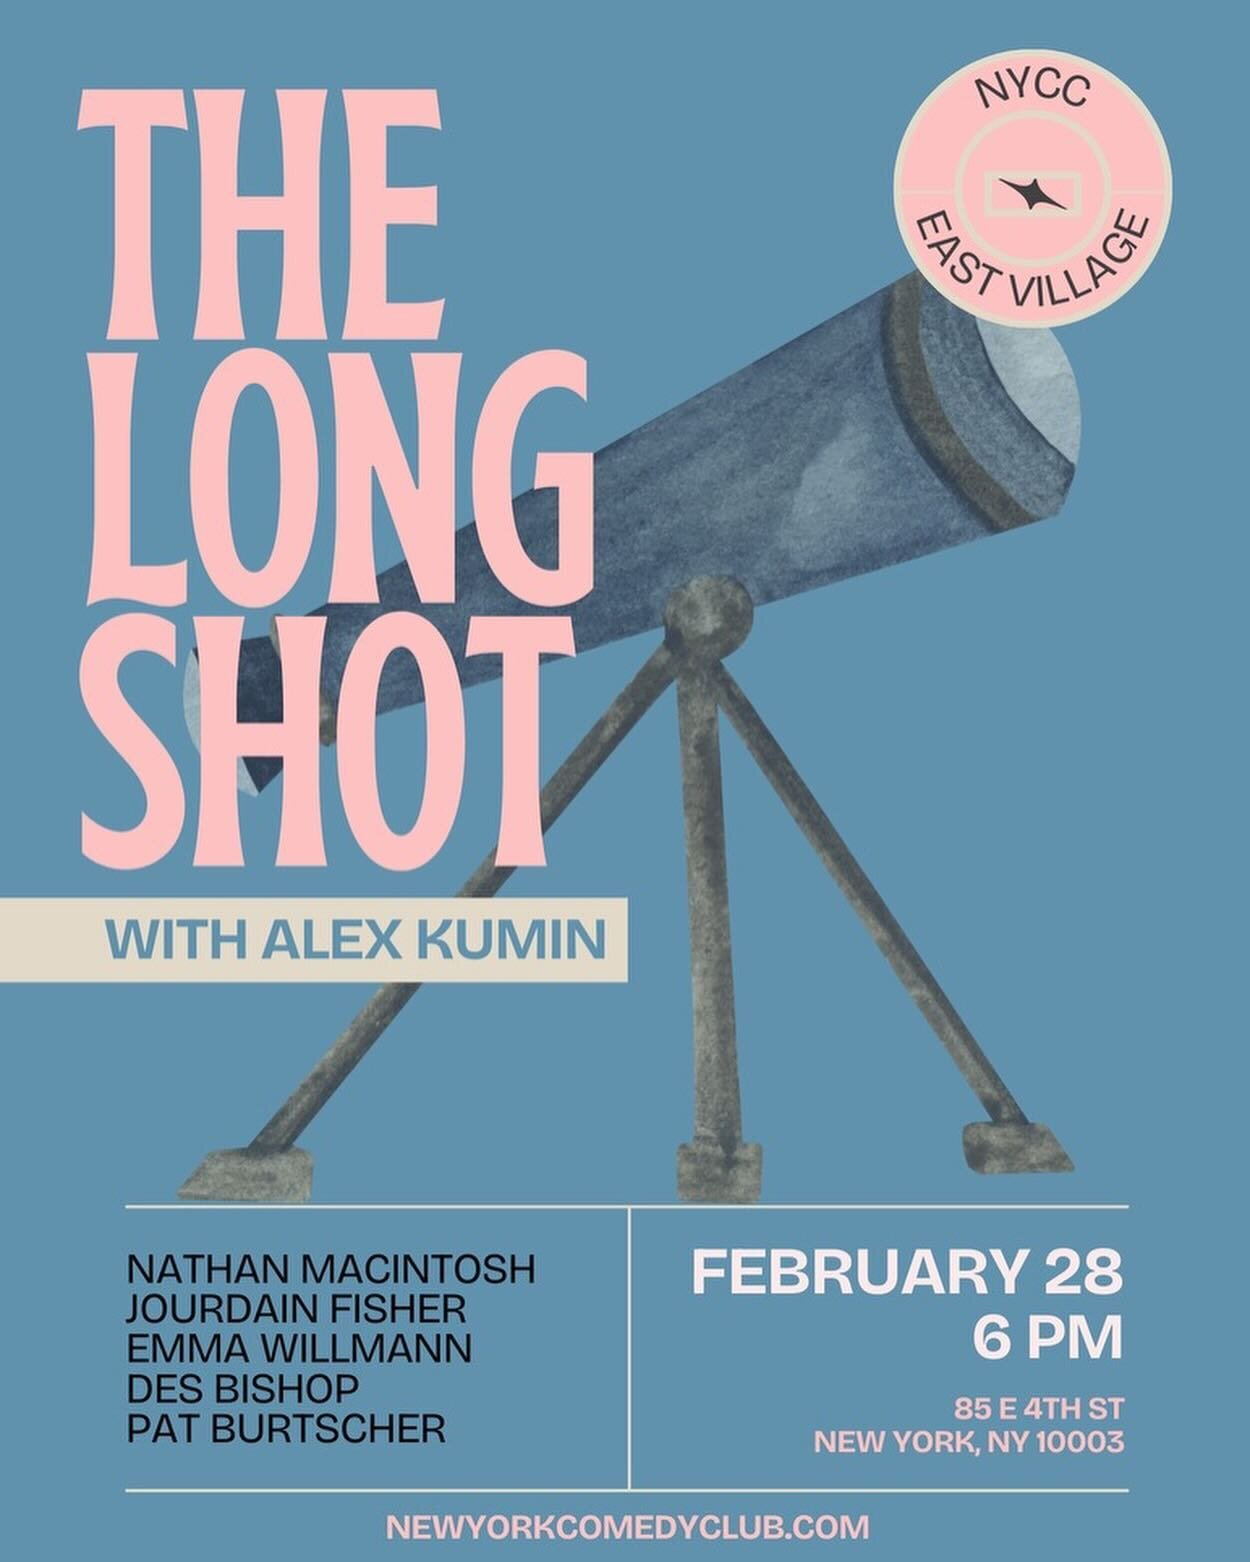 Hiii New York - Im starting a new jokes show at @nycomedyclub on Feb 28th!! Veteran comedians + 10 minutes + their freshest material, all hosted by yours truly ✌🏼 Use promo code ALEX for $10 off your ticket - we&rsquo;re gonna have some fun ✨🪩 tick